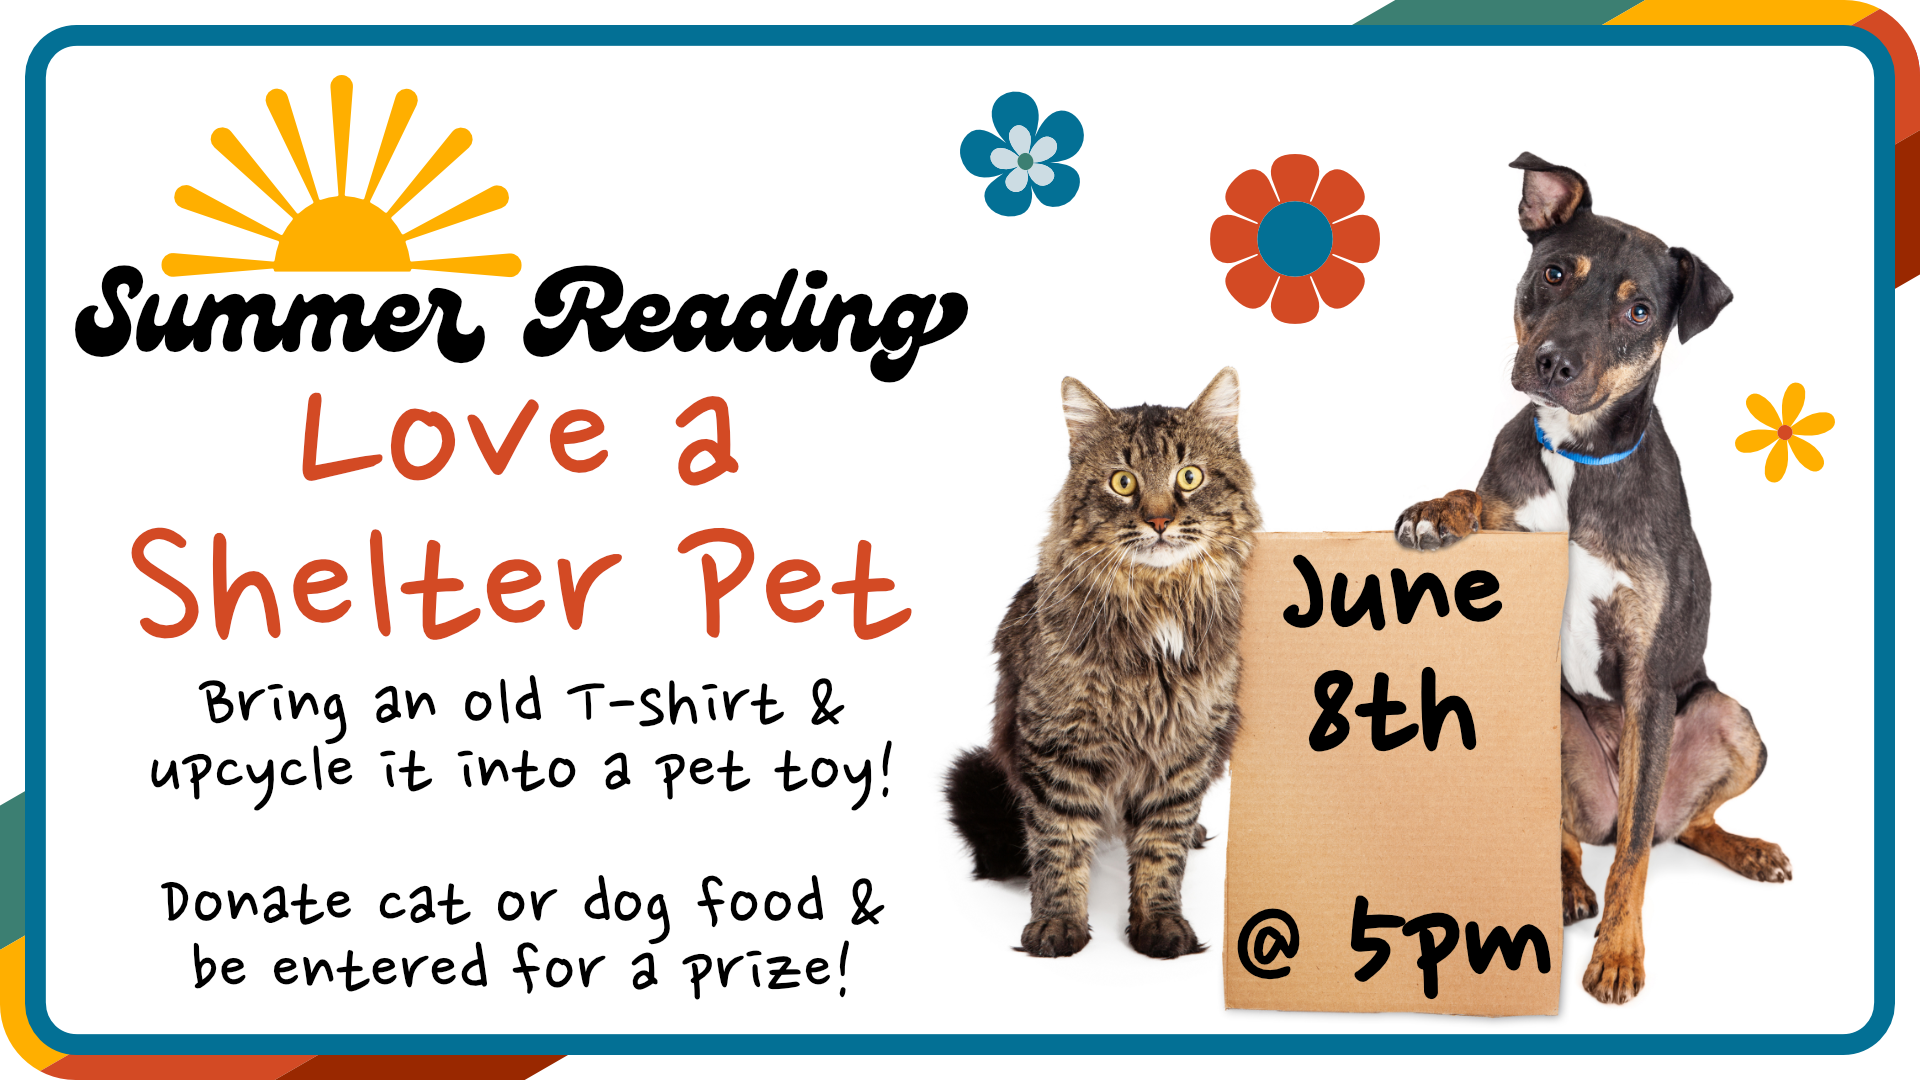 Love a Shelter Pet, June 8th at 5pm, bring an old T-shirt and upcycle it into a pet toy, donate cat or dog food to be entered for a prize